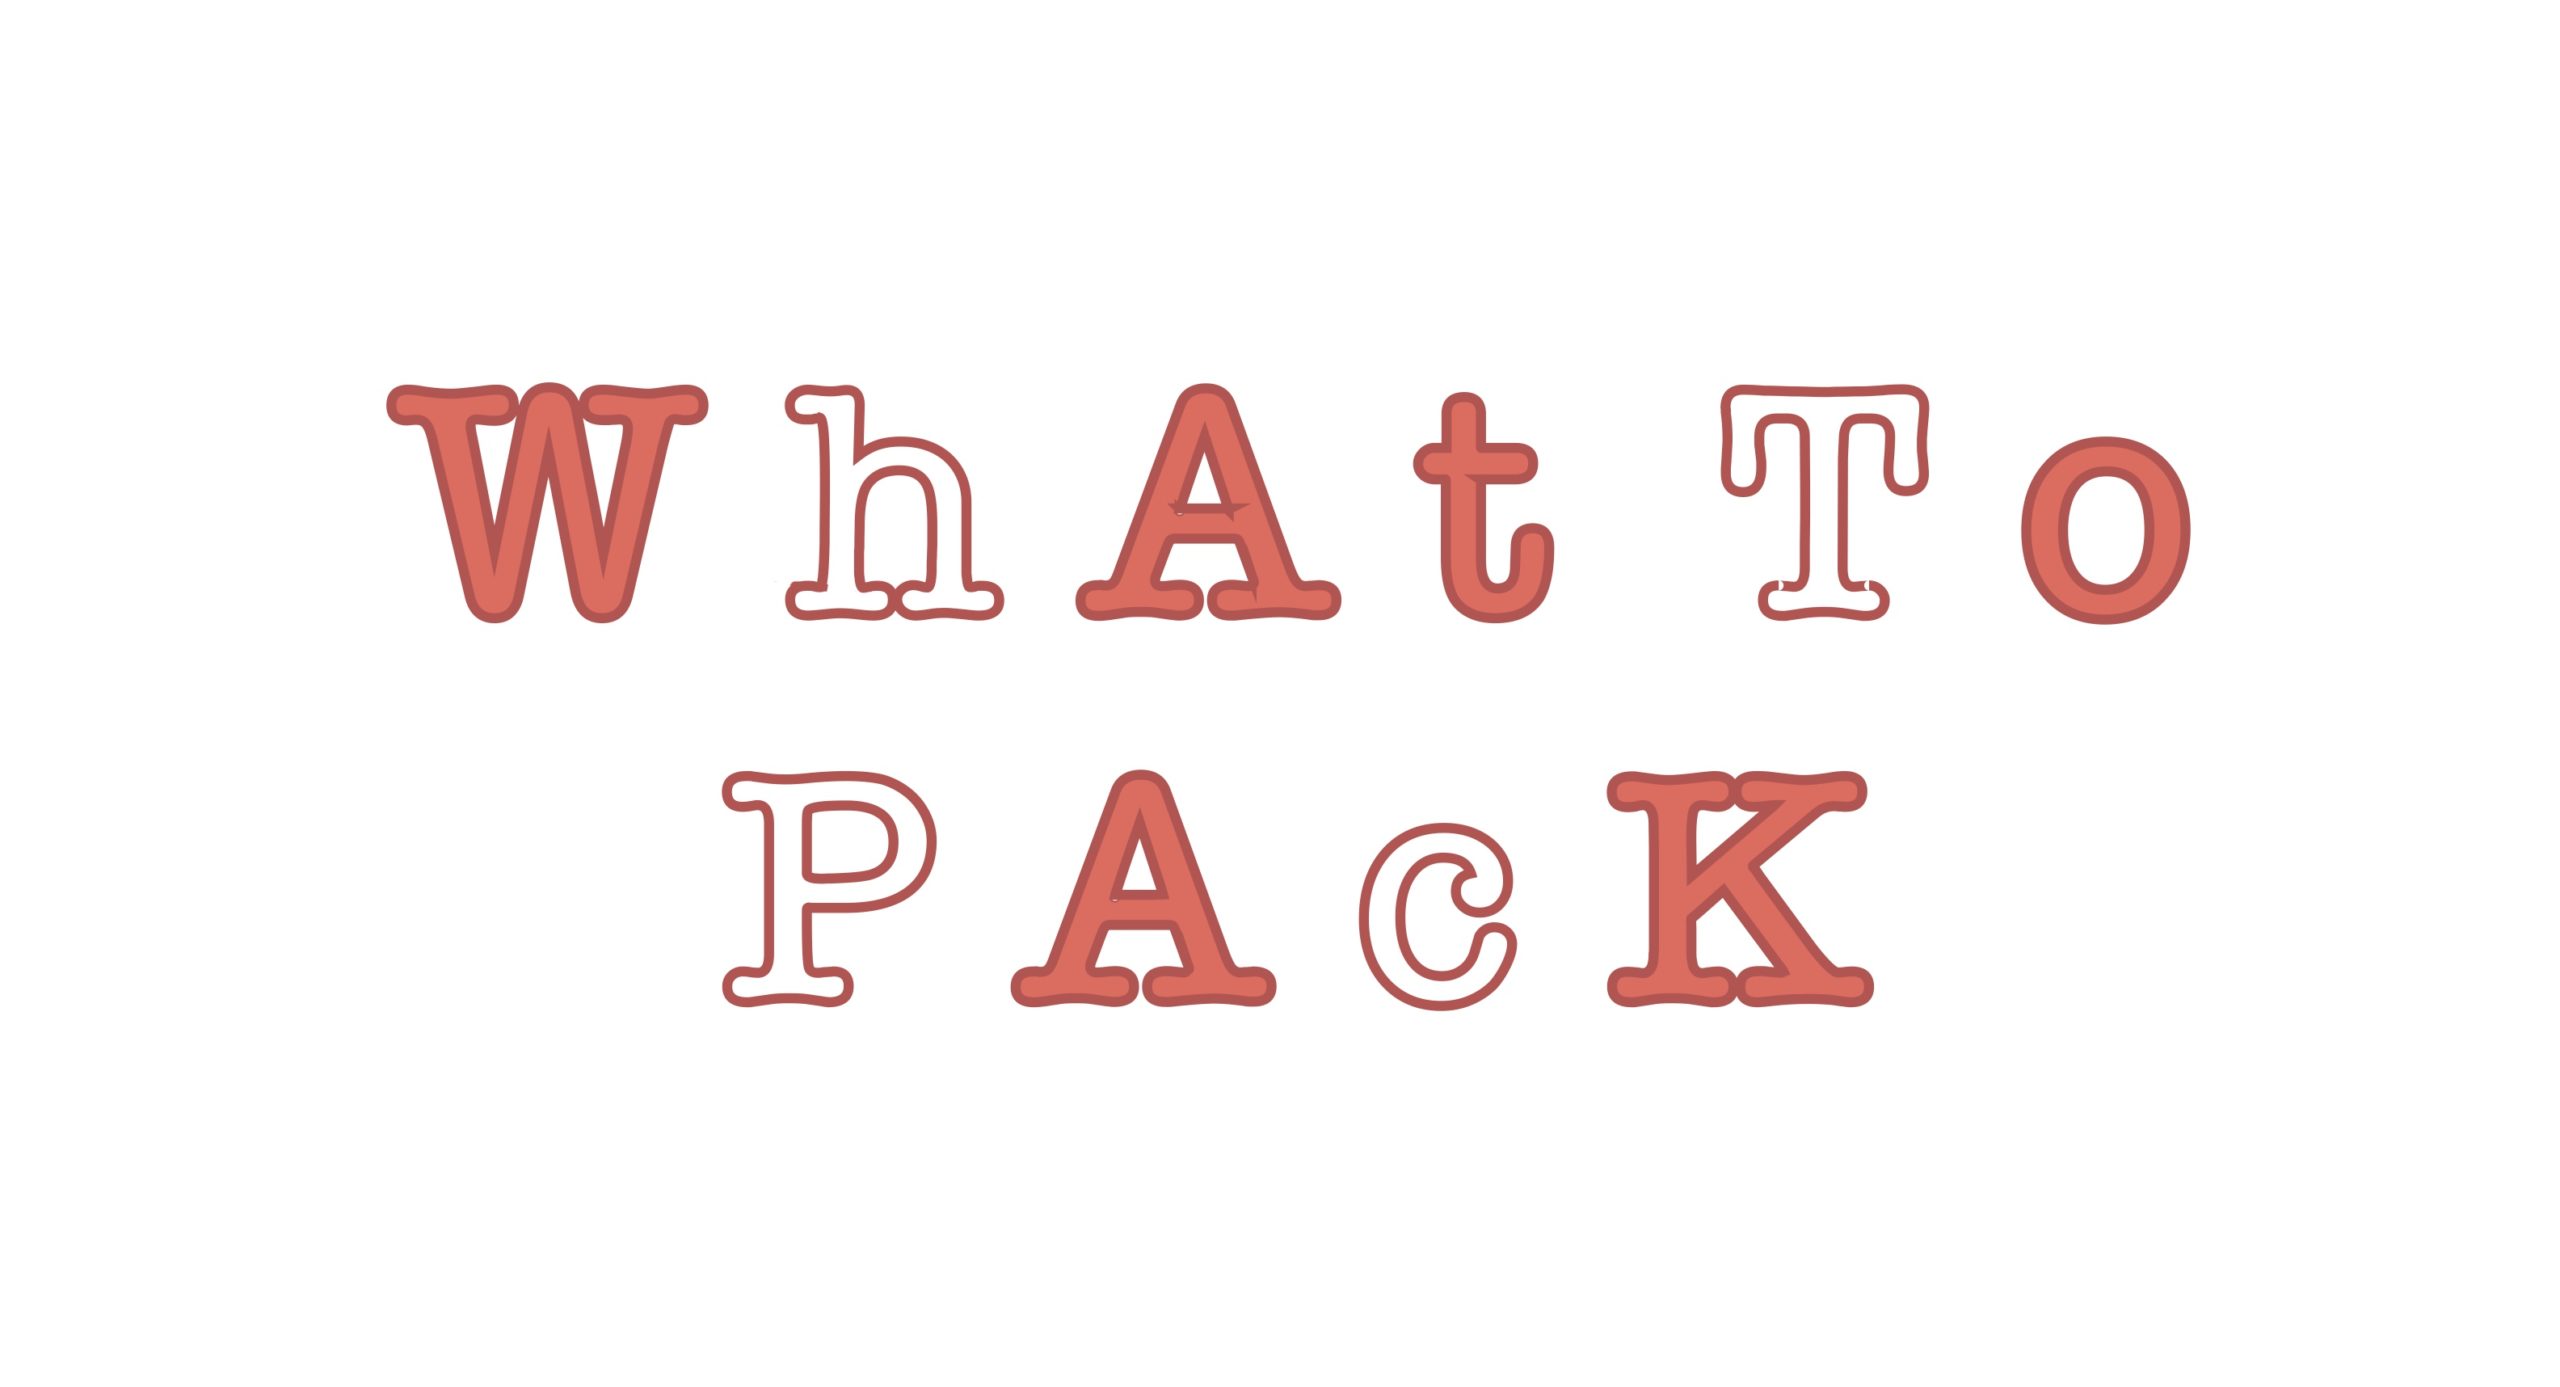 plain image with the words: 'what to pack'